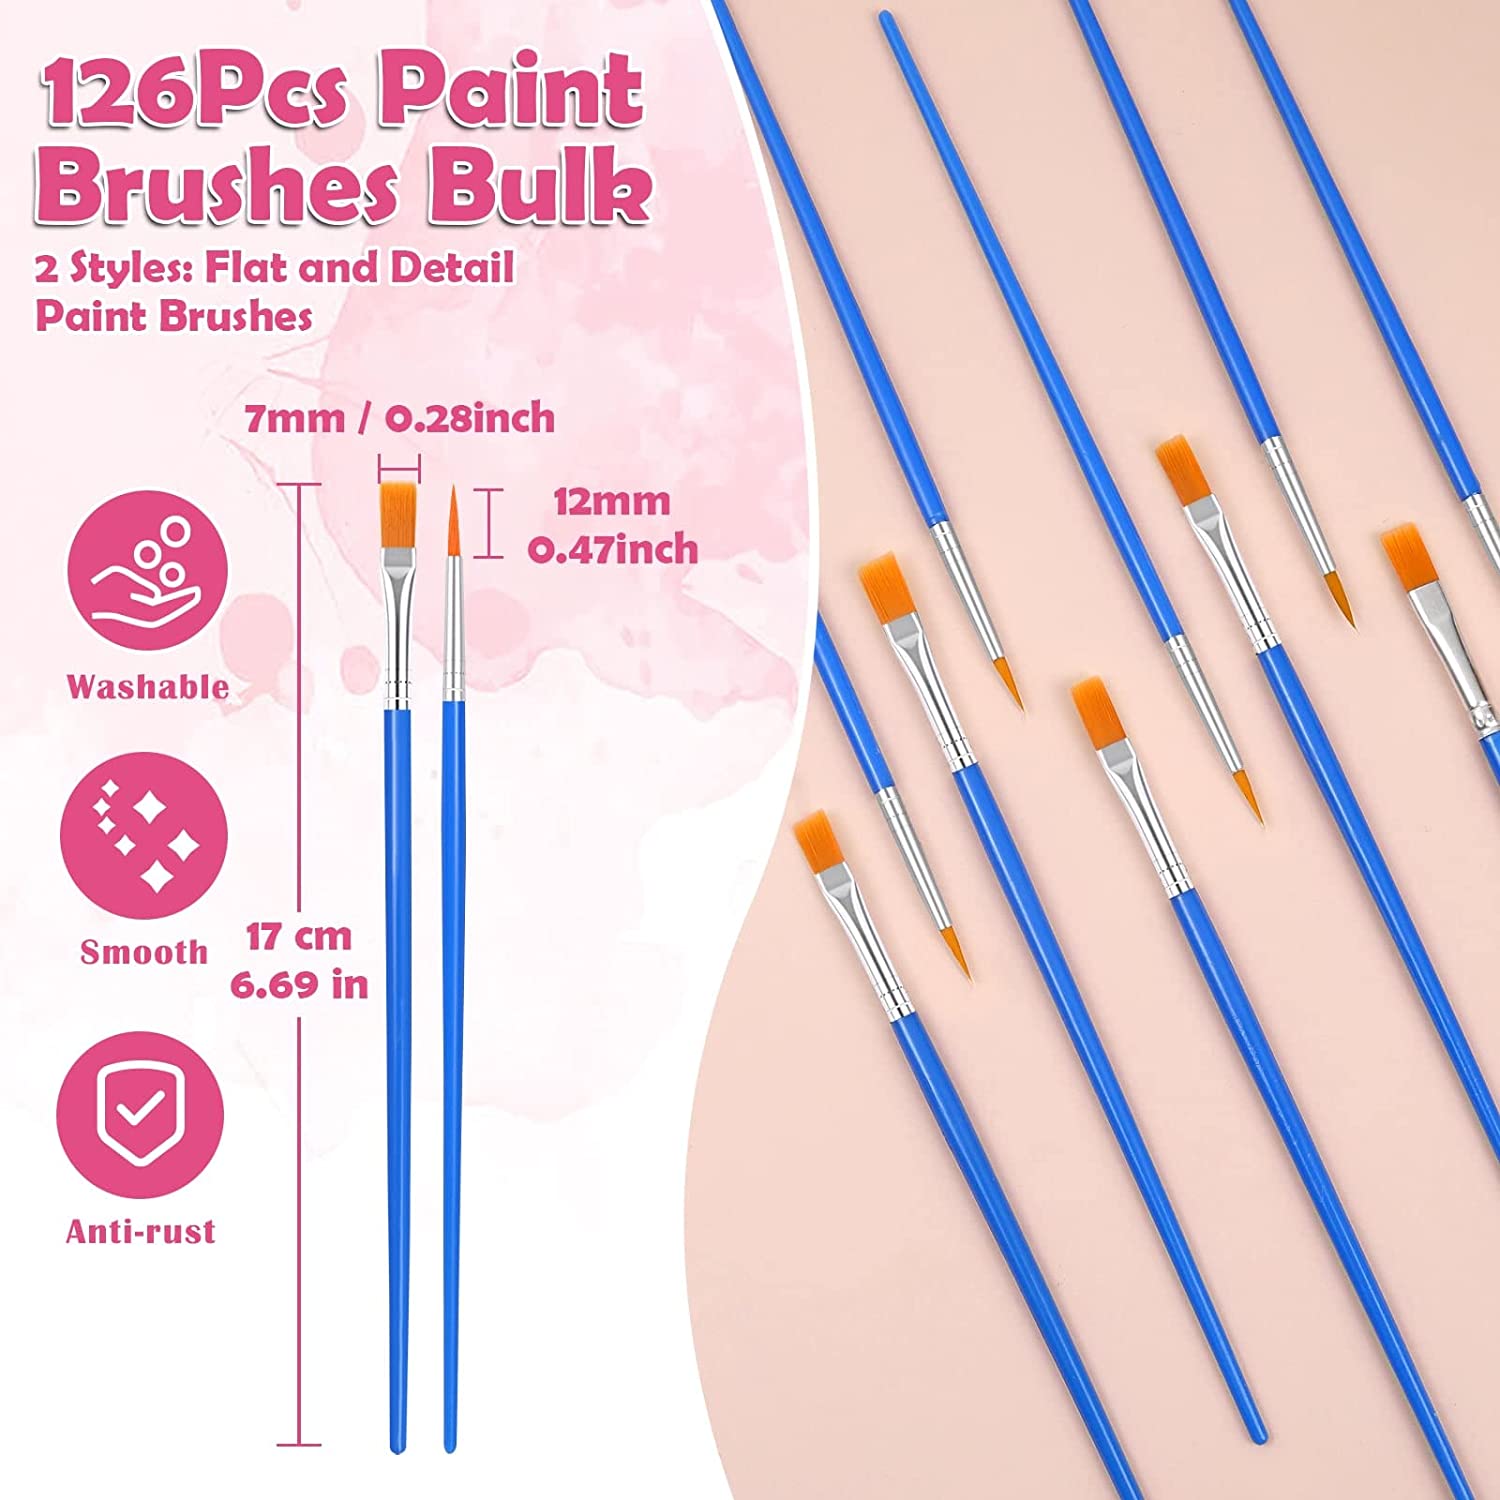 126 Pcs Small Paint Brushes Bulk, Kids Paint Brushes with Flat and Round Pointed Paint Brushes Set, Craft Brushes for Classroom Acrylic Oil Watercolor